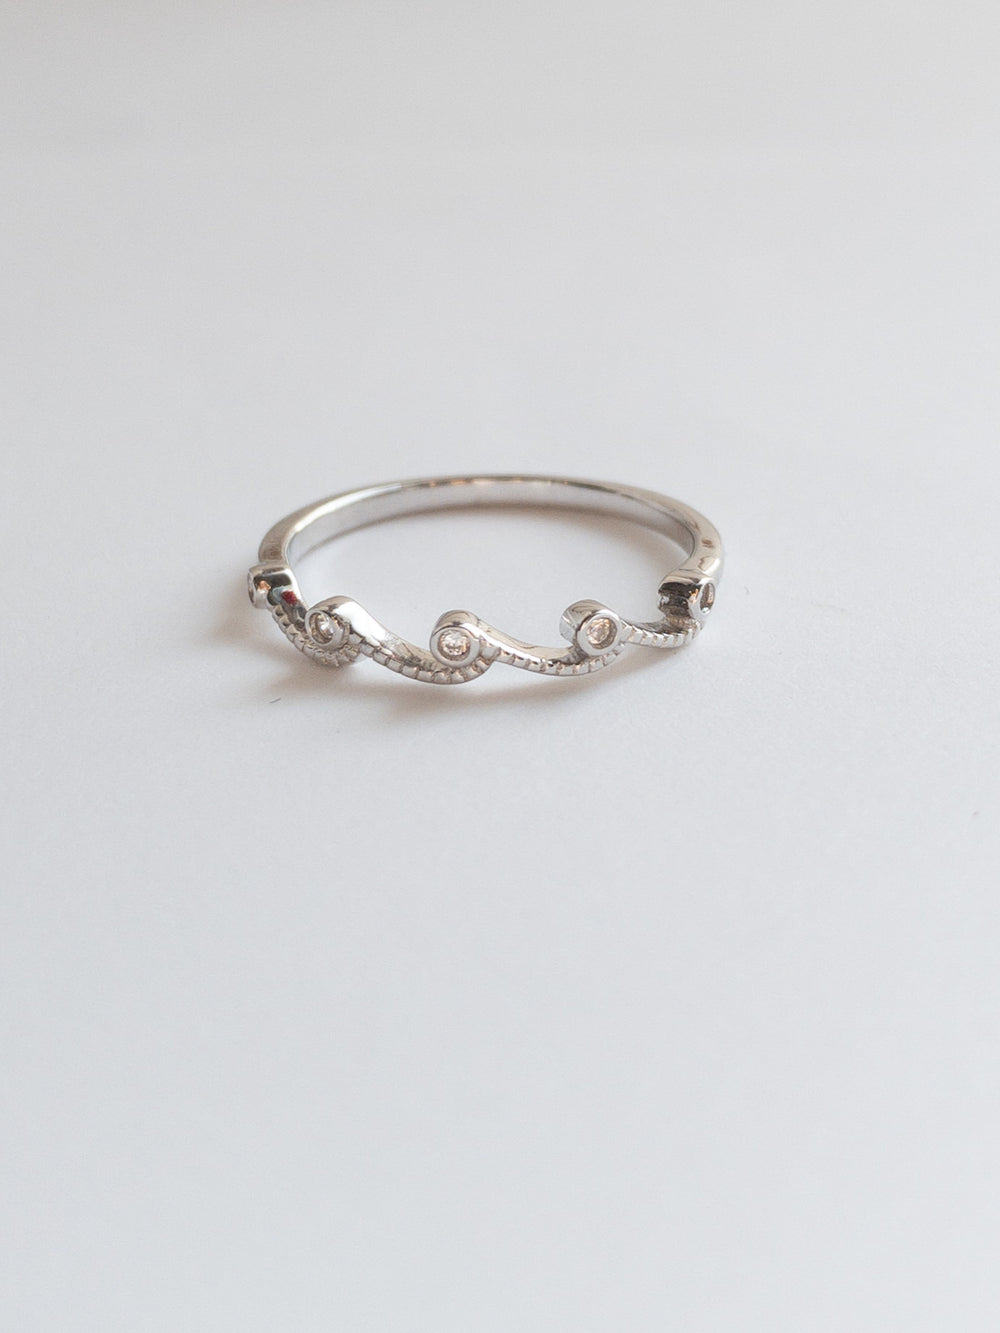 Tiny Sparkly waves rings- silver sterling silver 